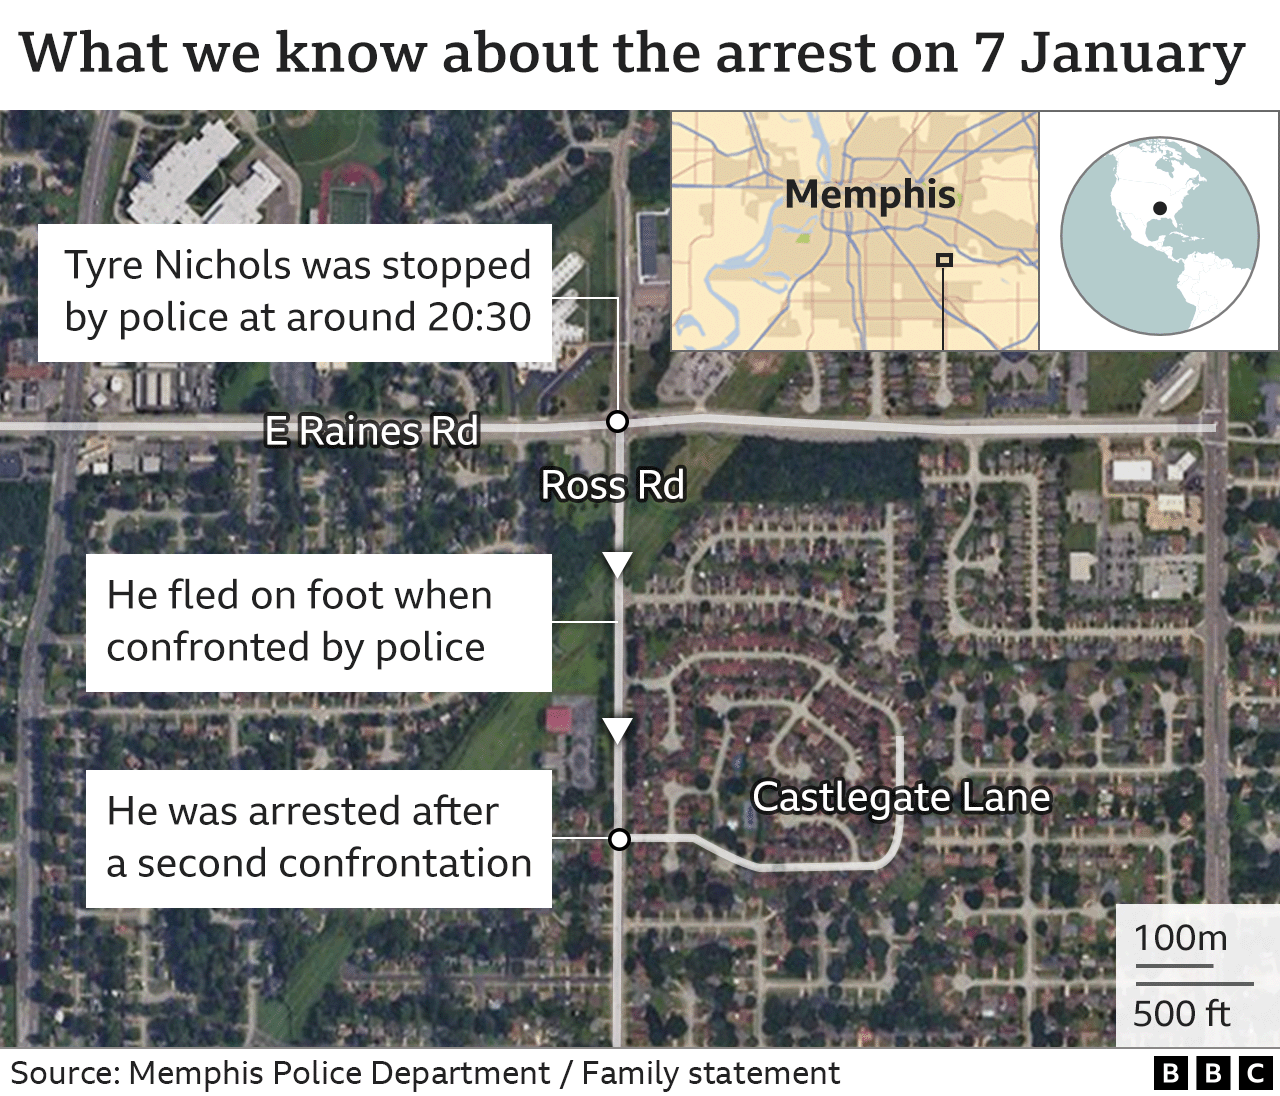 A map showing what we know about the arrest of Tyre Nichols on the night of the 7 January: He was stopped by police at around 20:30 at the junction of East Raines Rd and Ross Road in Memphis, but he fled south along Ross Road before he was apprehended near Castlegate Lane after a second confrontation with police.